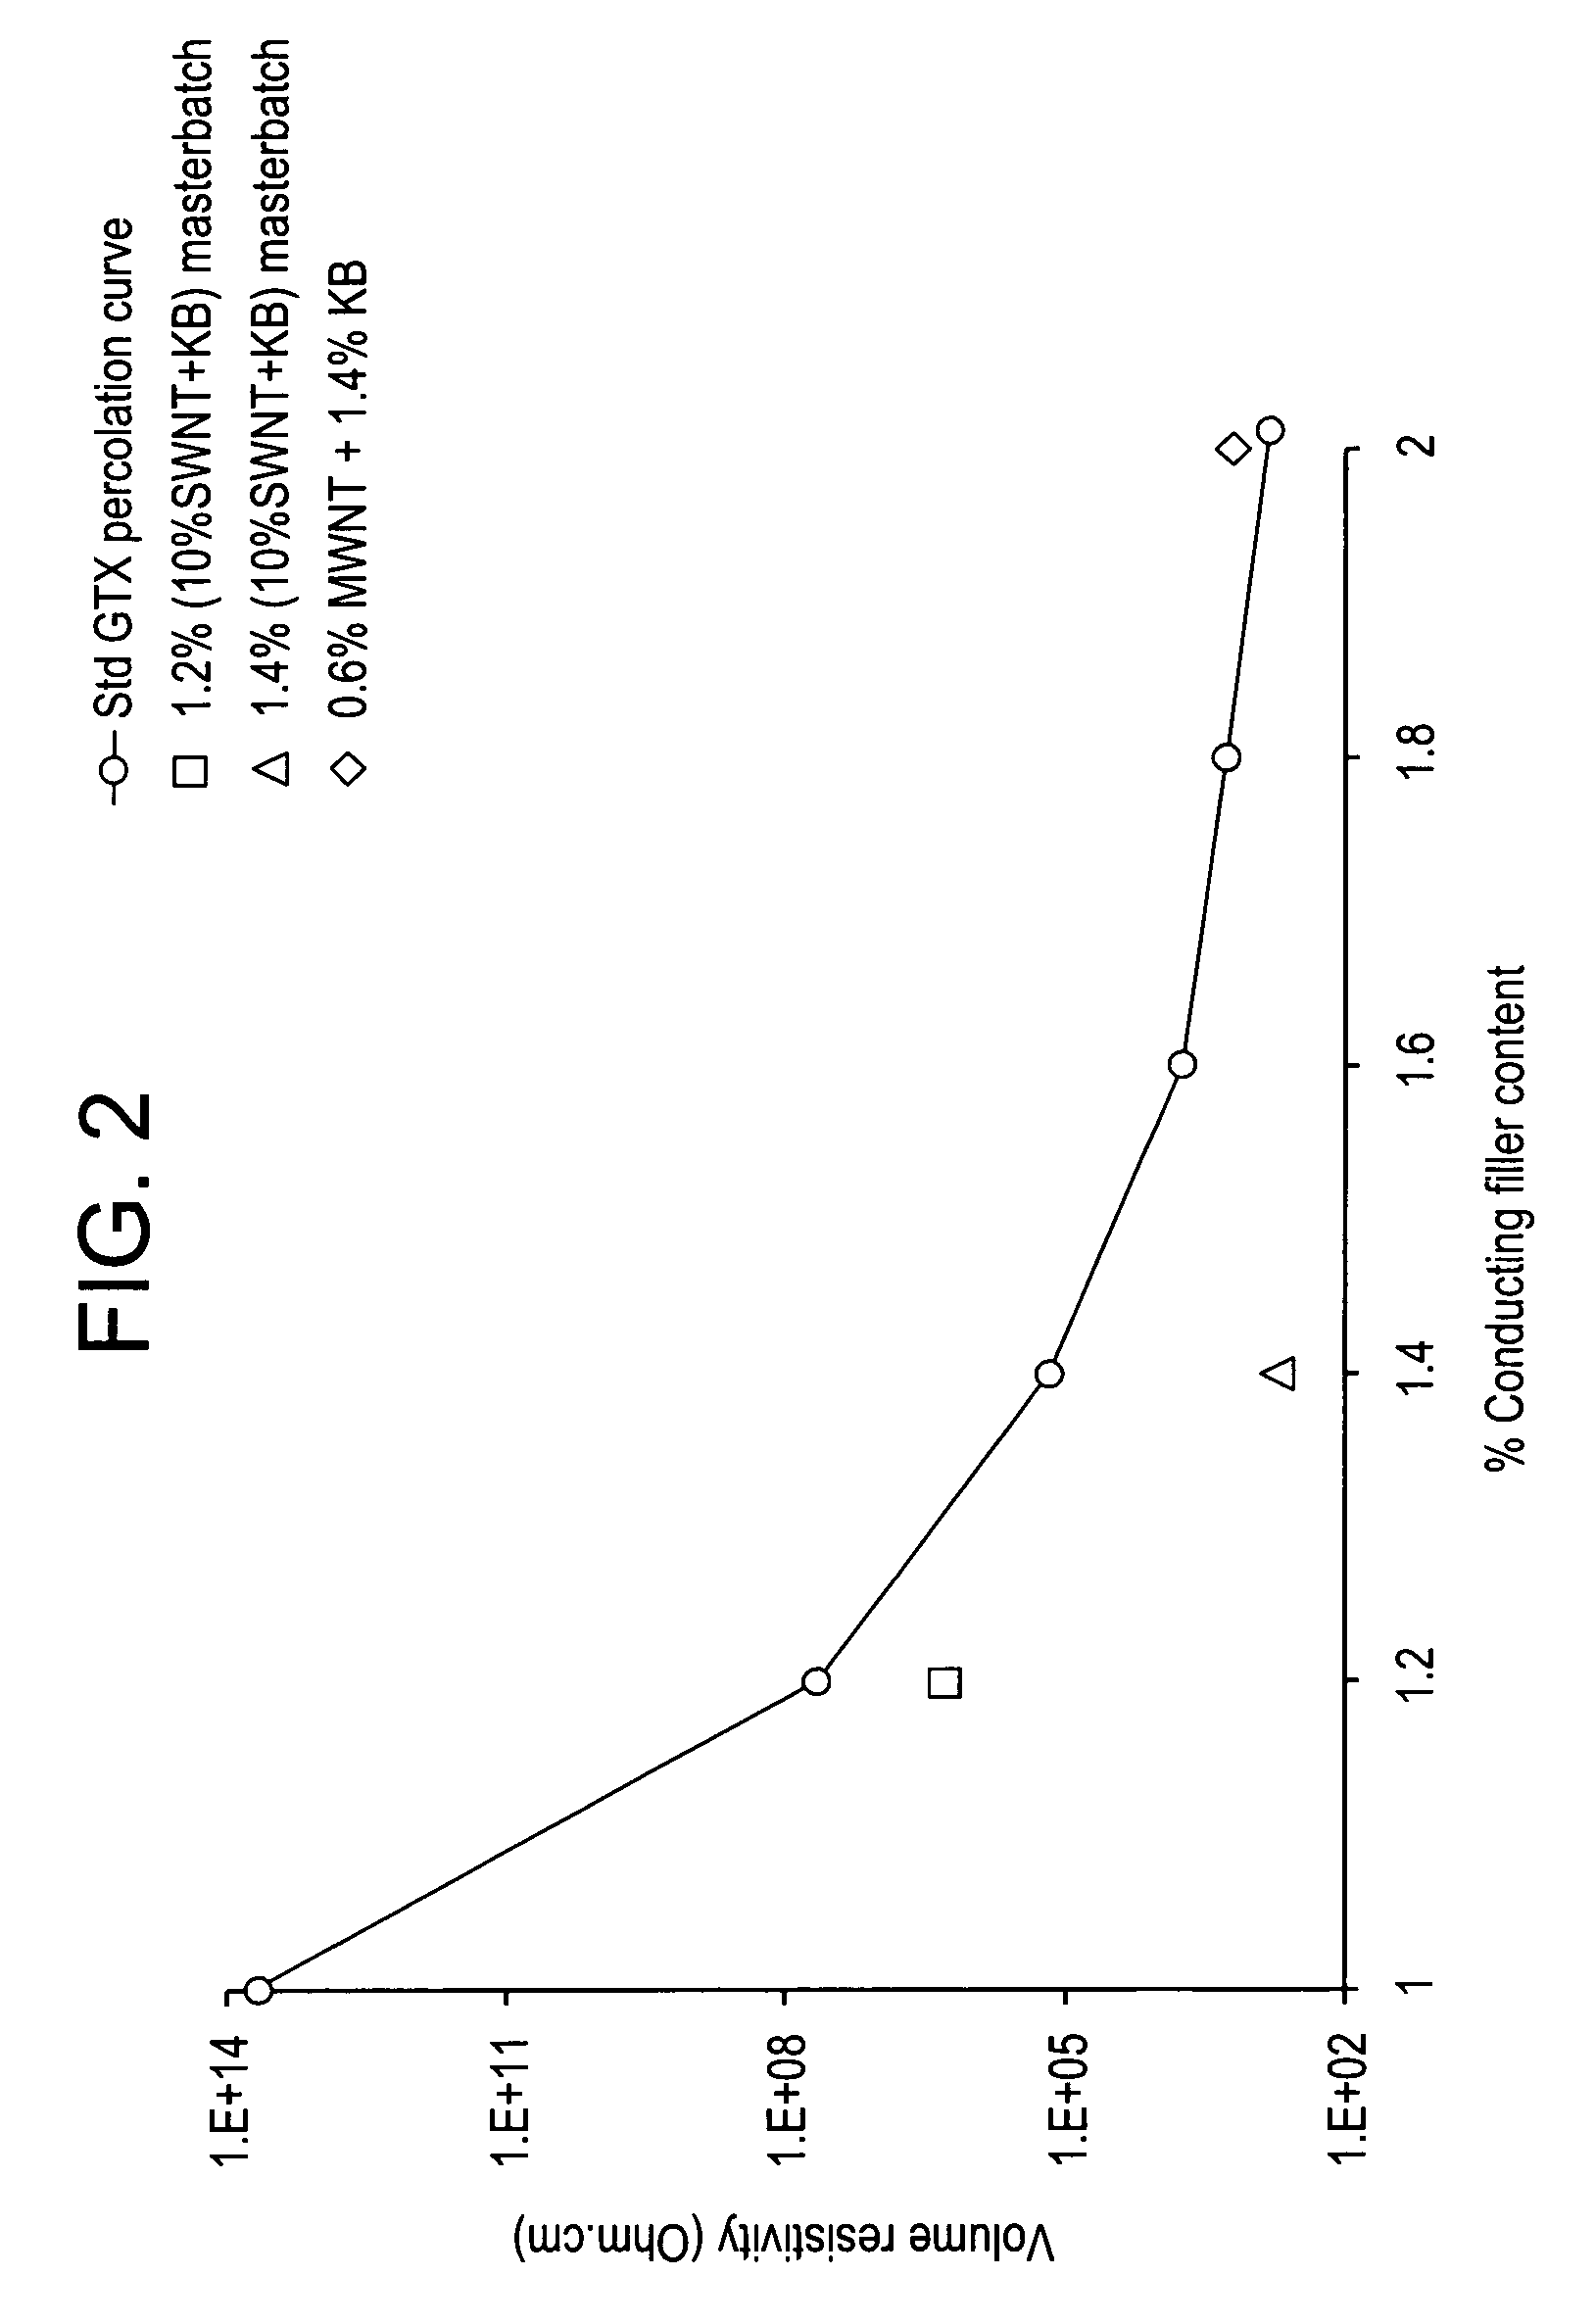 Conductive thermoplastic compositions, methods of manufacture and articles derived from such compositions